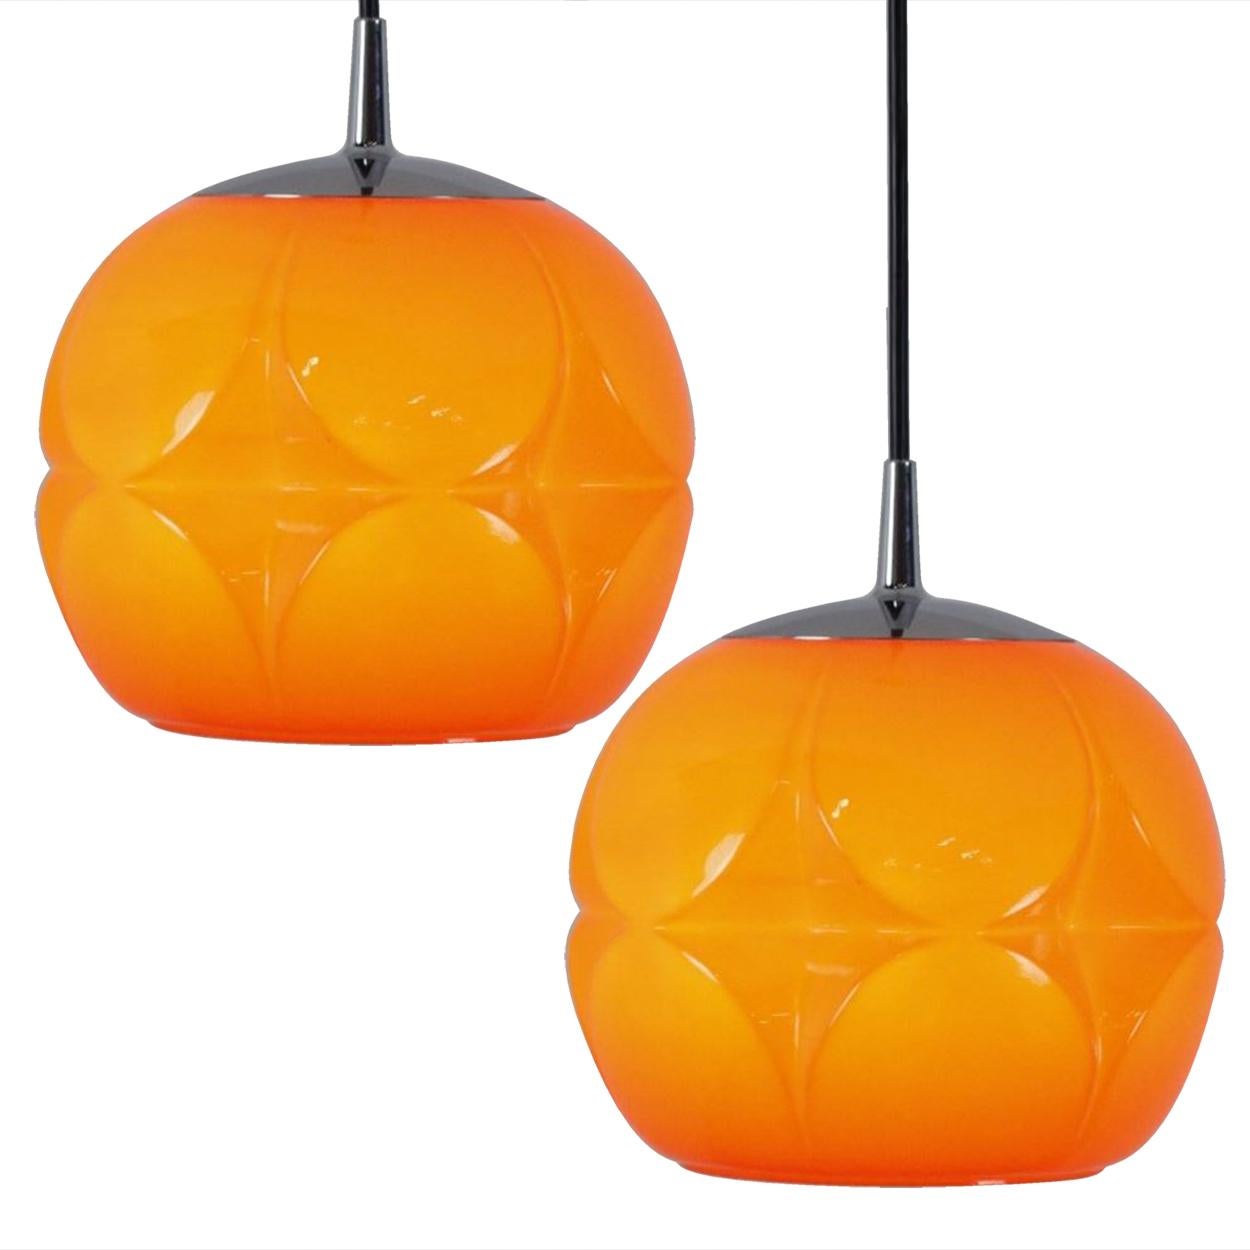 There’s something about orange that screams this particular era. And this 1970s pair of Peil & Putzler ceiling pendant lamps is very orange! Image 2 is the lamp with the light on.

The lampshade is made of a ‘cast opaque orange glass’ with an